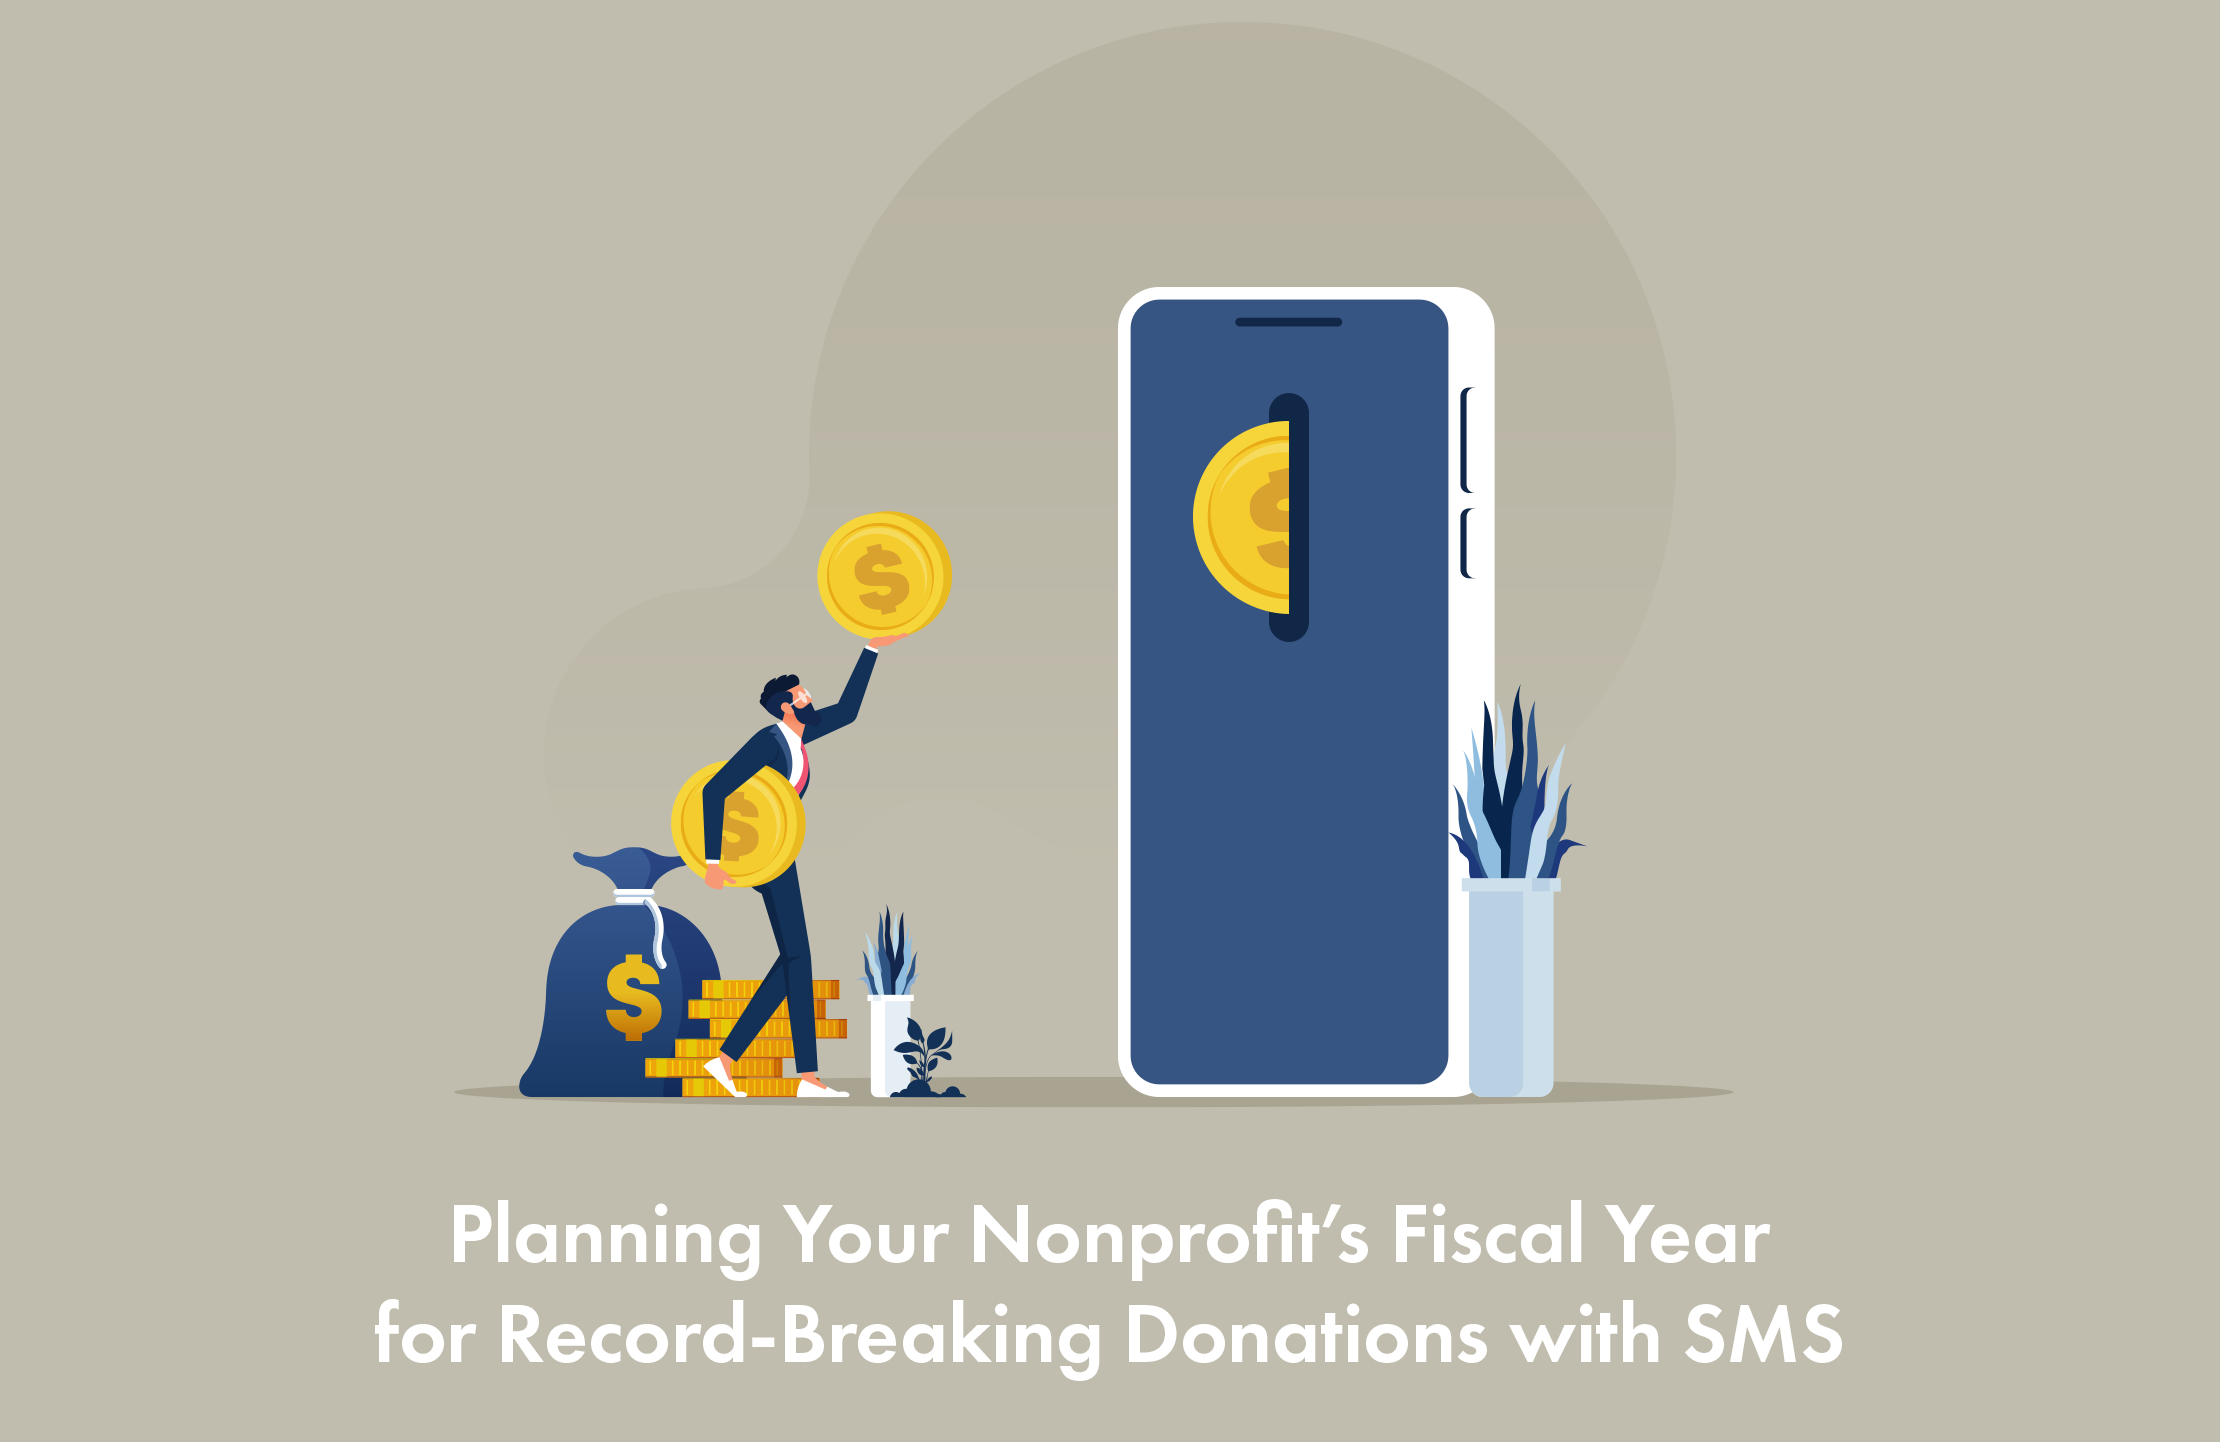 Planning Your Nonprofit’s Fiscal Year for Record-Breaking Donations with SMS